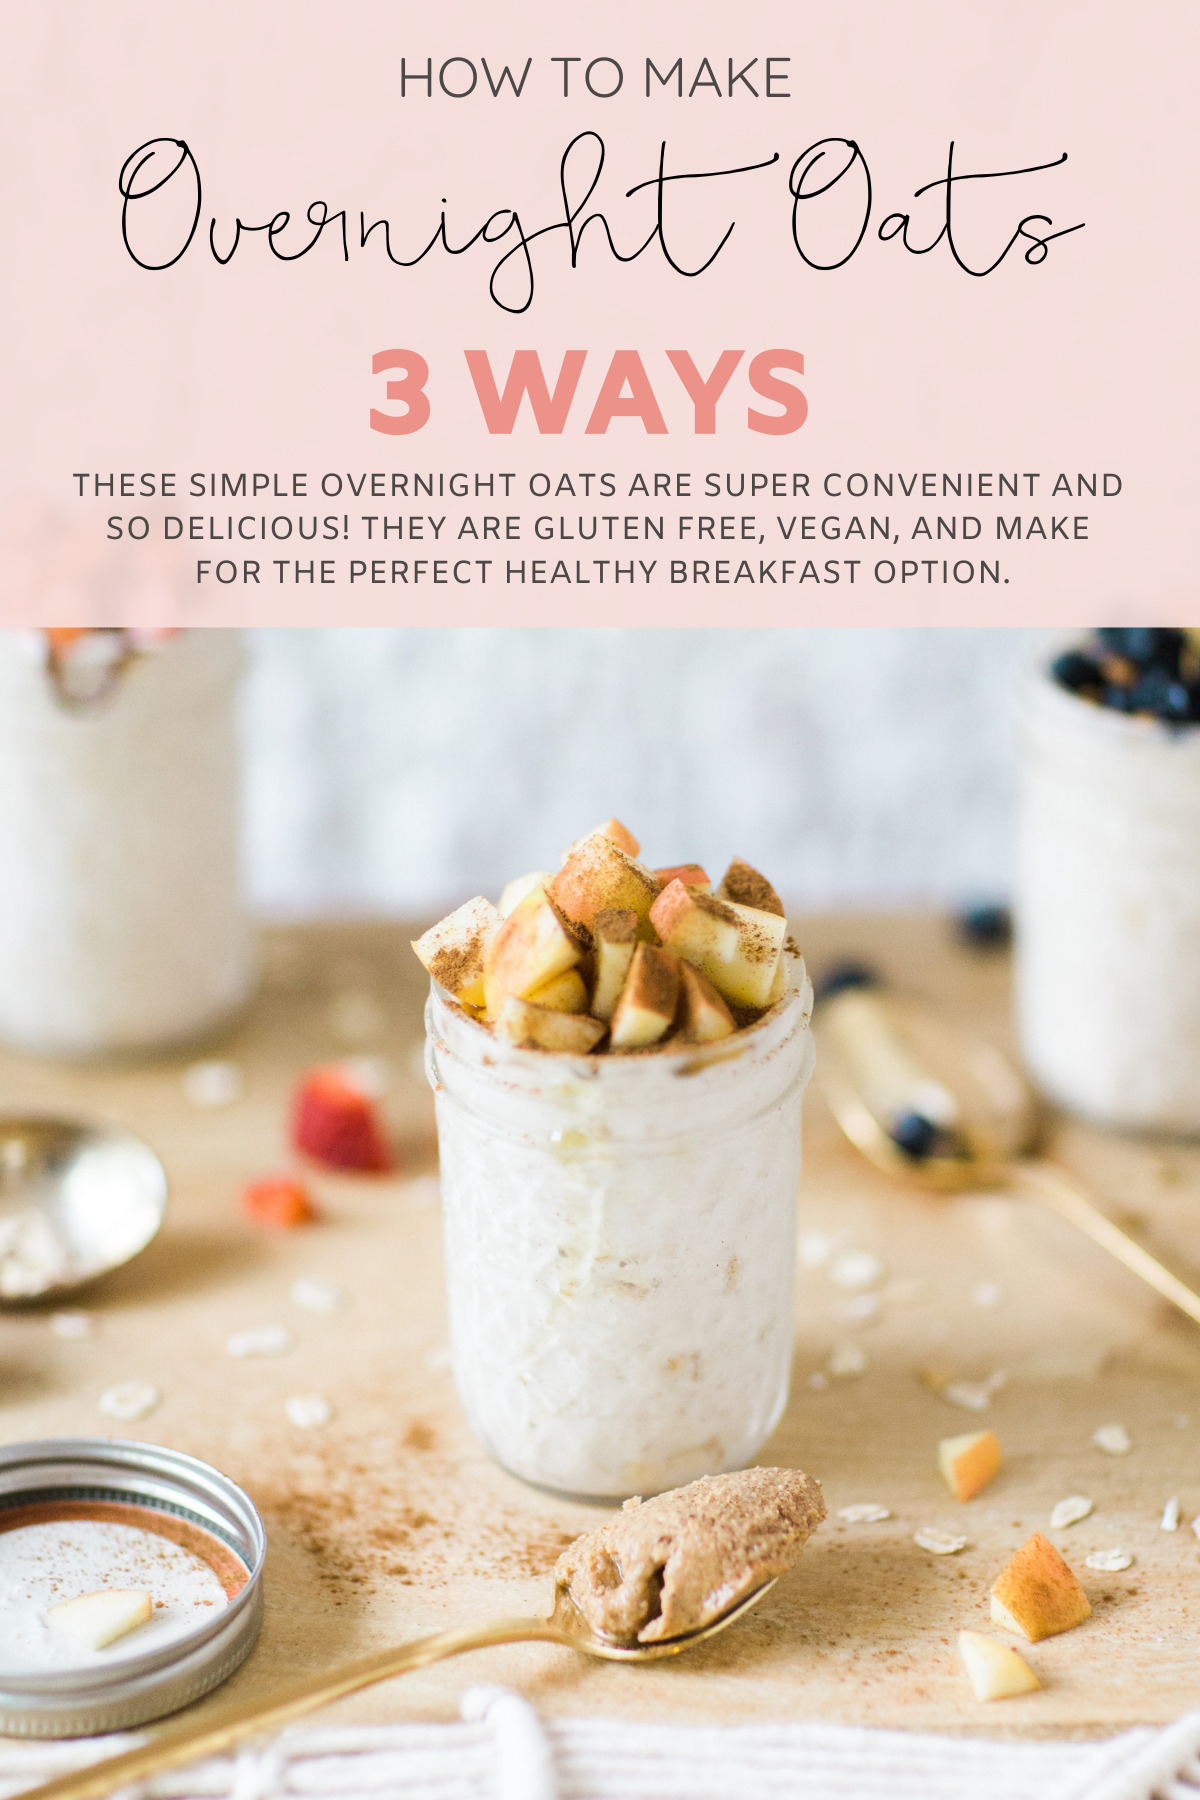 How to make easy overnight oats - three ways! (Your new healthy breakfast obsession.) Click through for the simple breakfast recipe. | glitterinc.com | @glitterinc